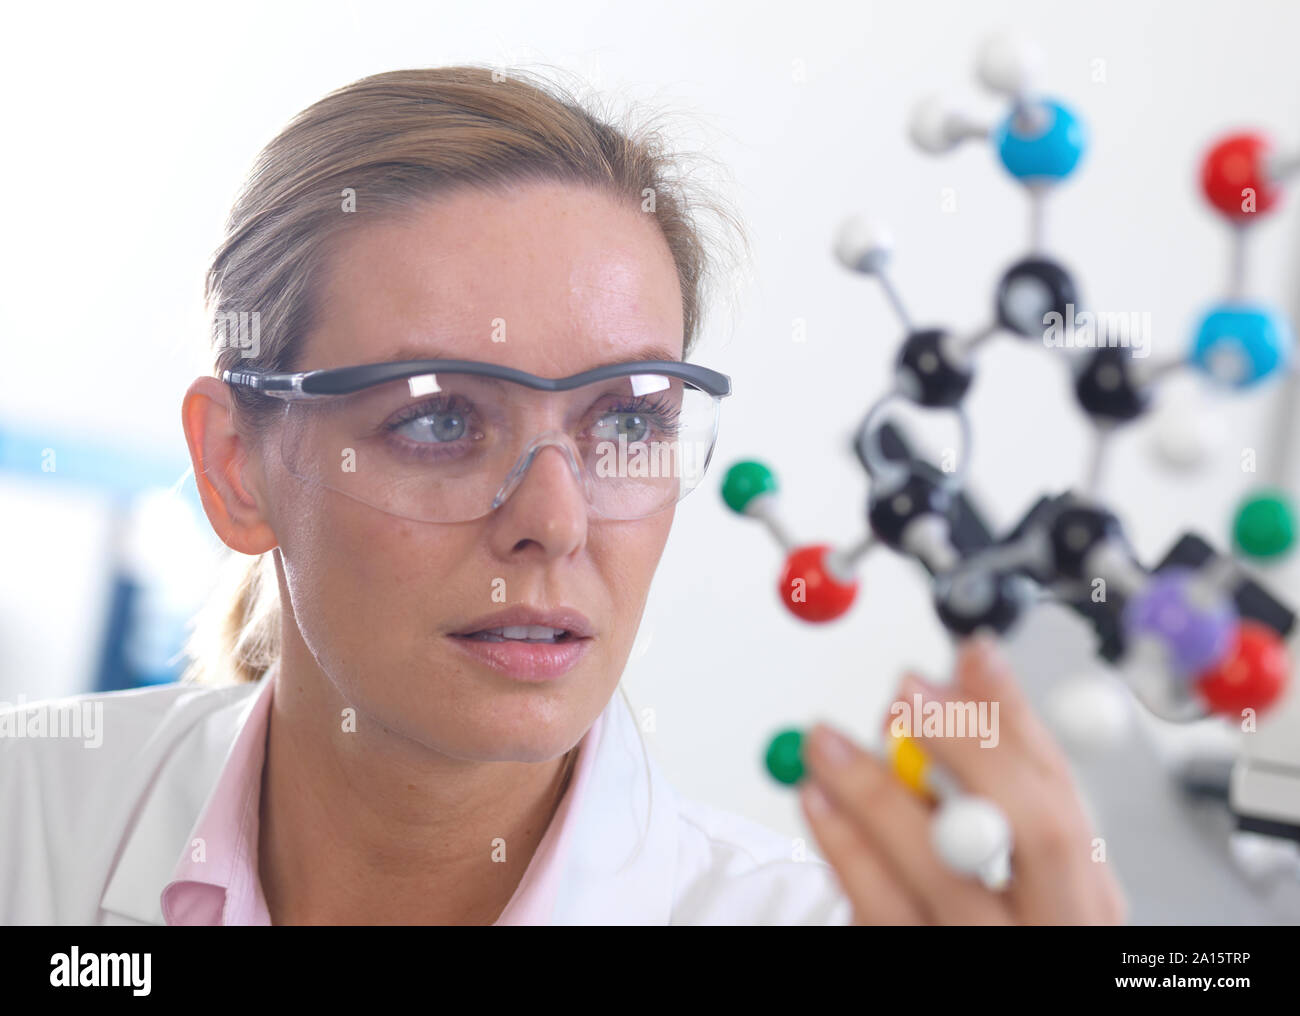 Scientist understanding a chemical formula using a ball and stick molecular model Stock Photo